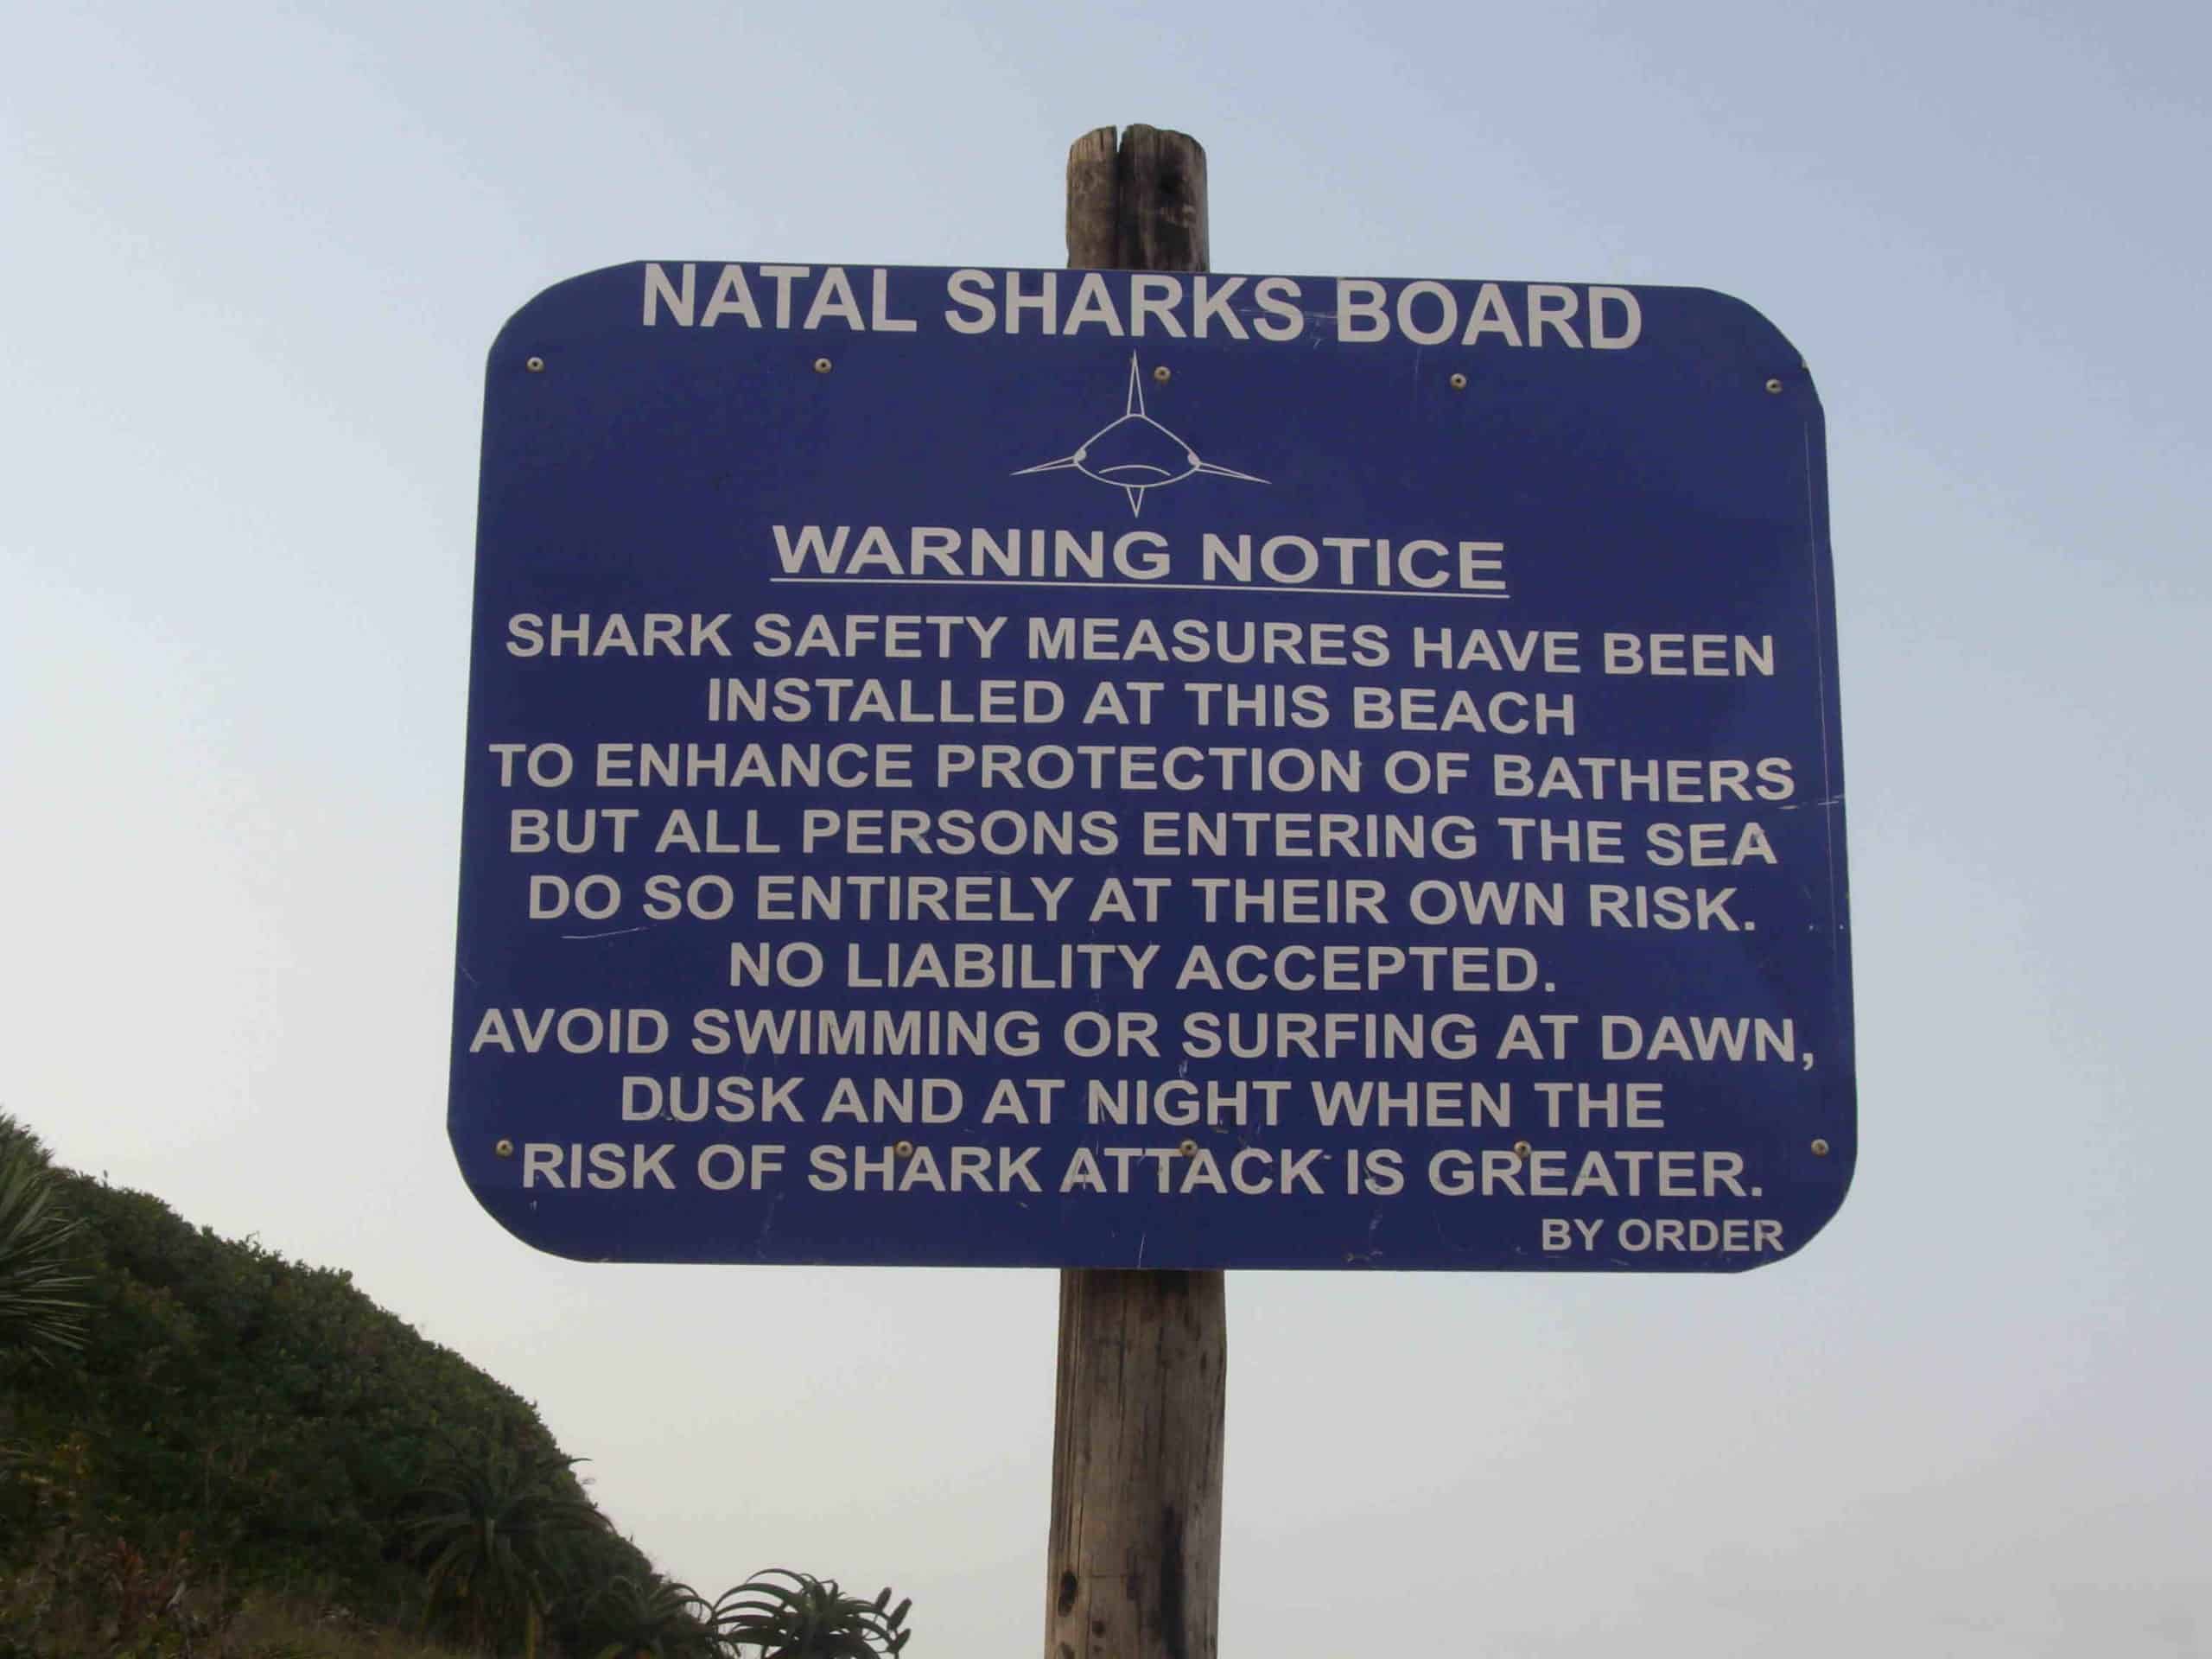 What do you do if you are being attacked by a shark?